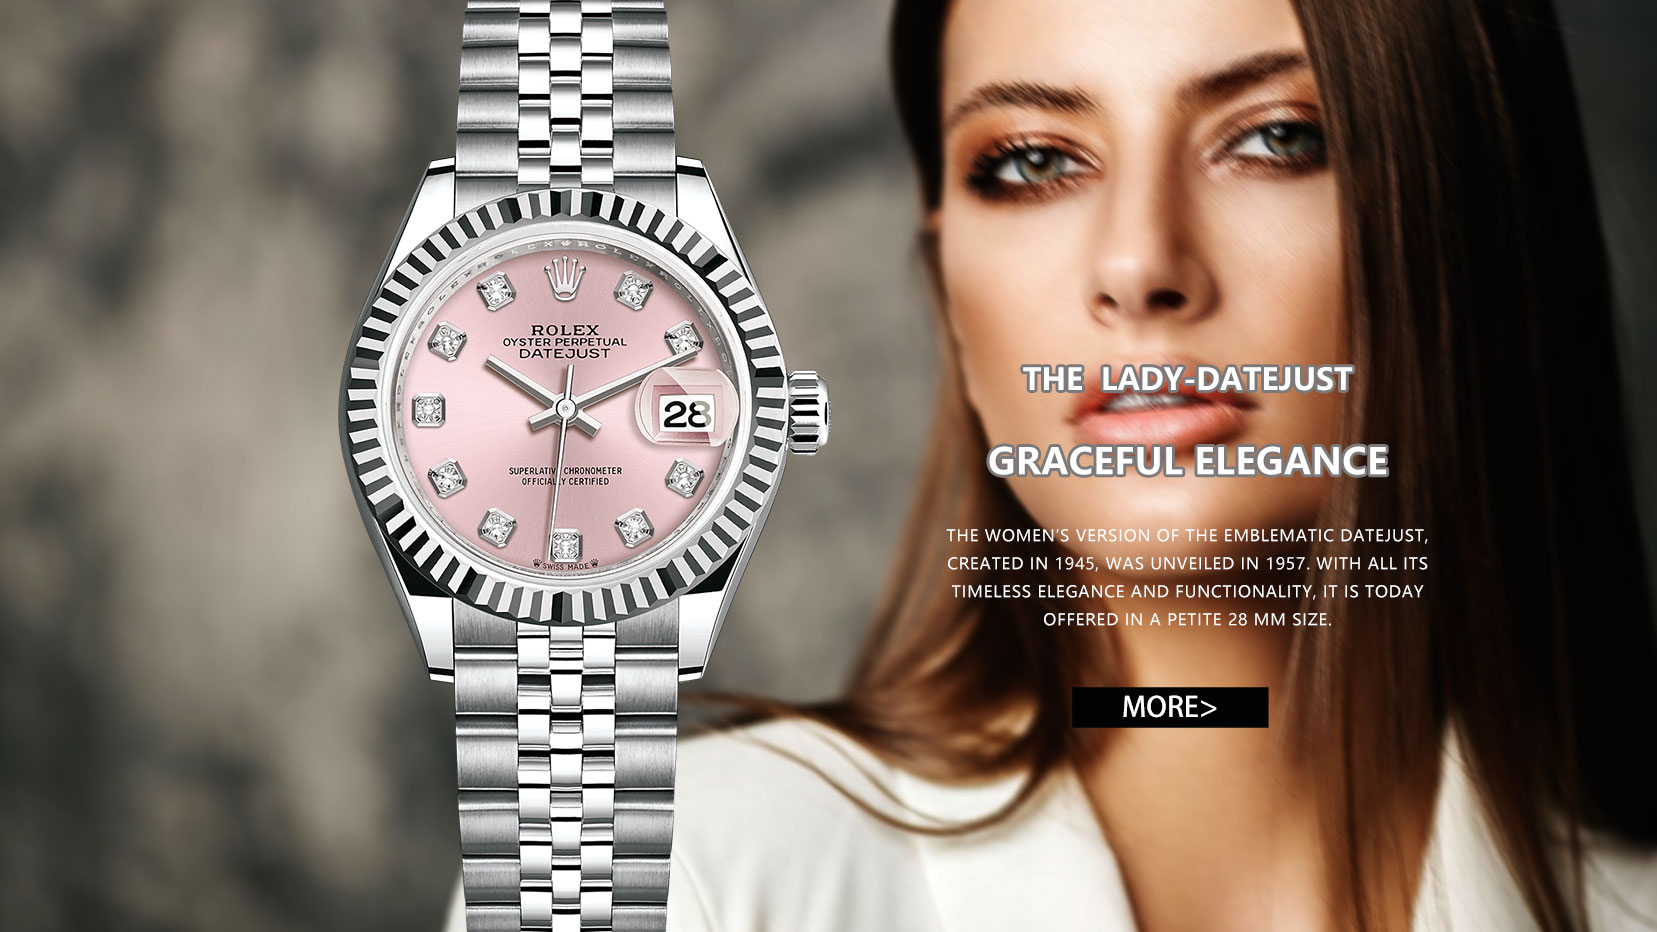 Female celebrities wearing Rolex watches - Best Place to Buy Replica Rolex  Watches